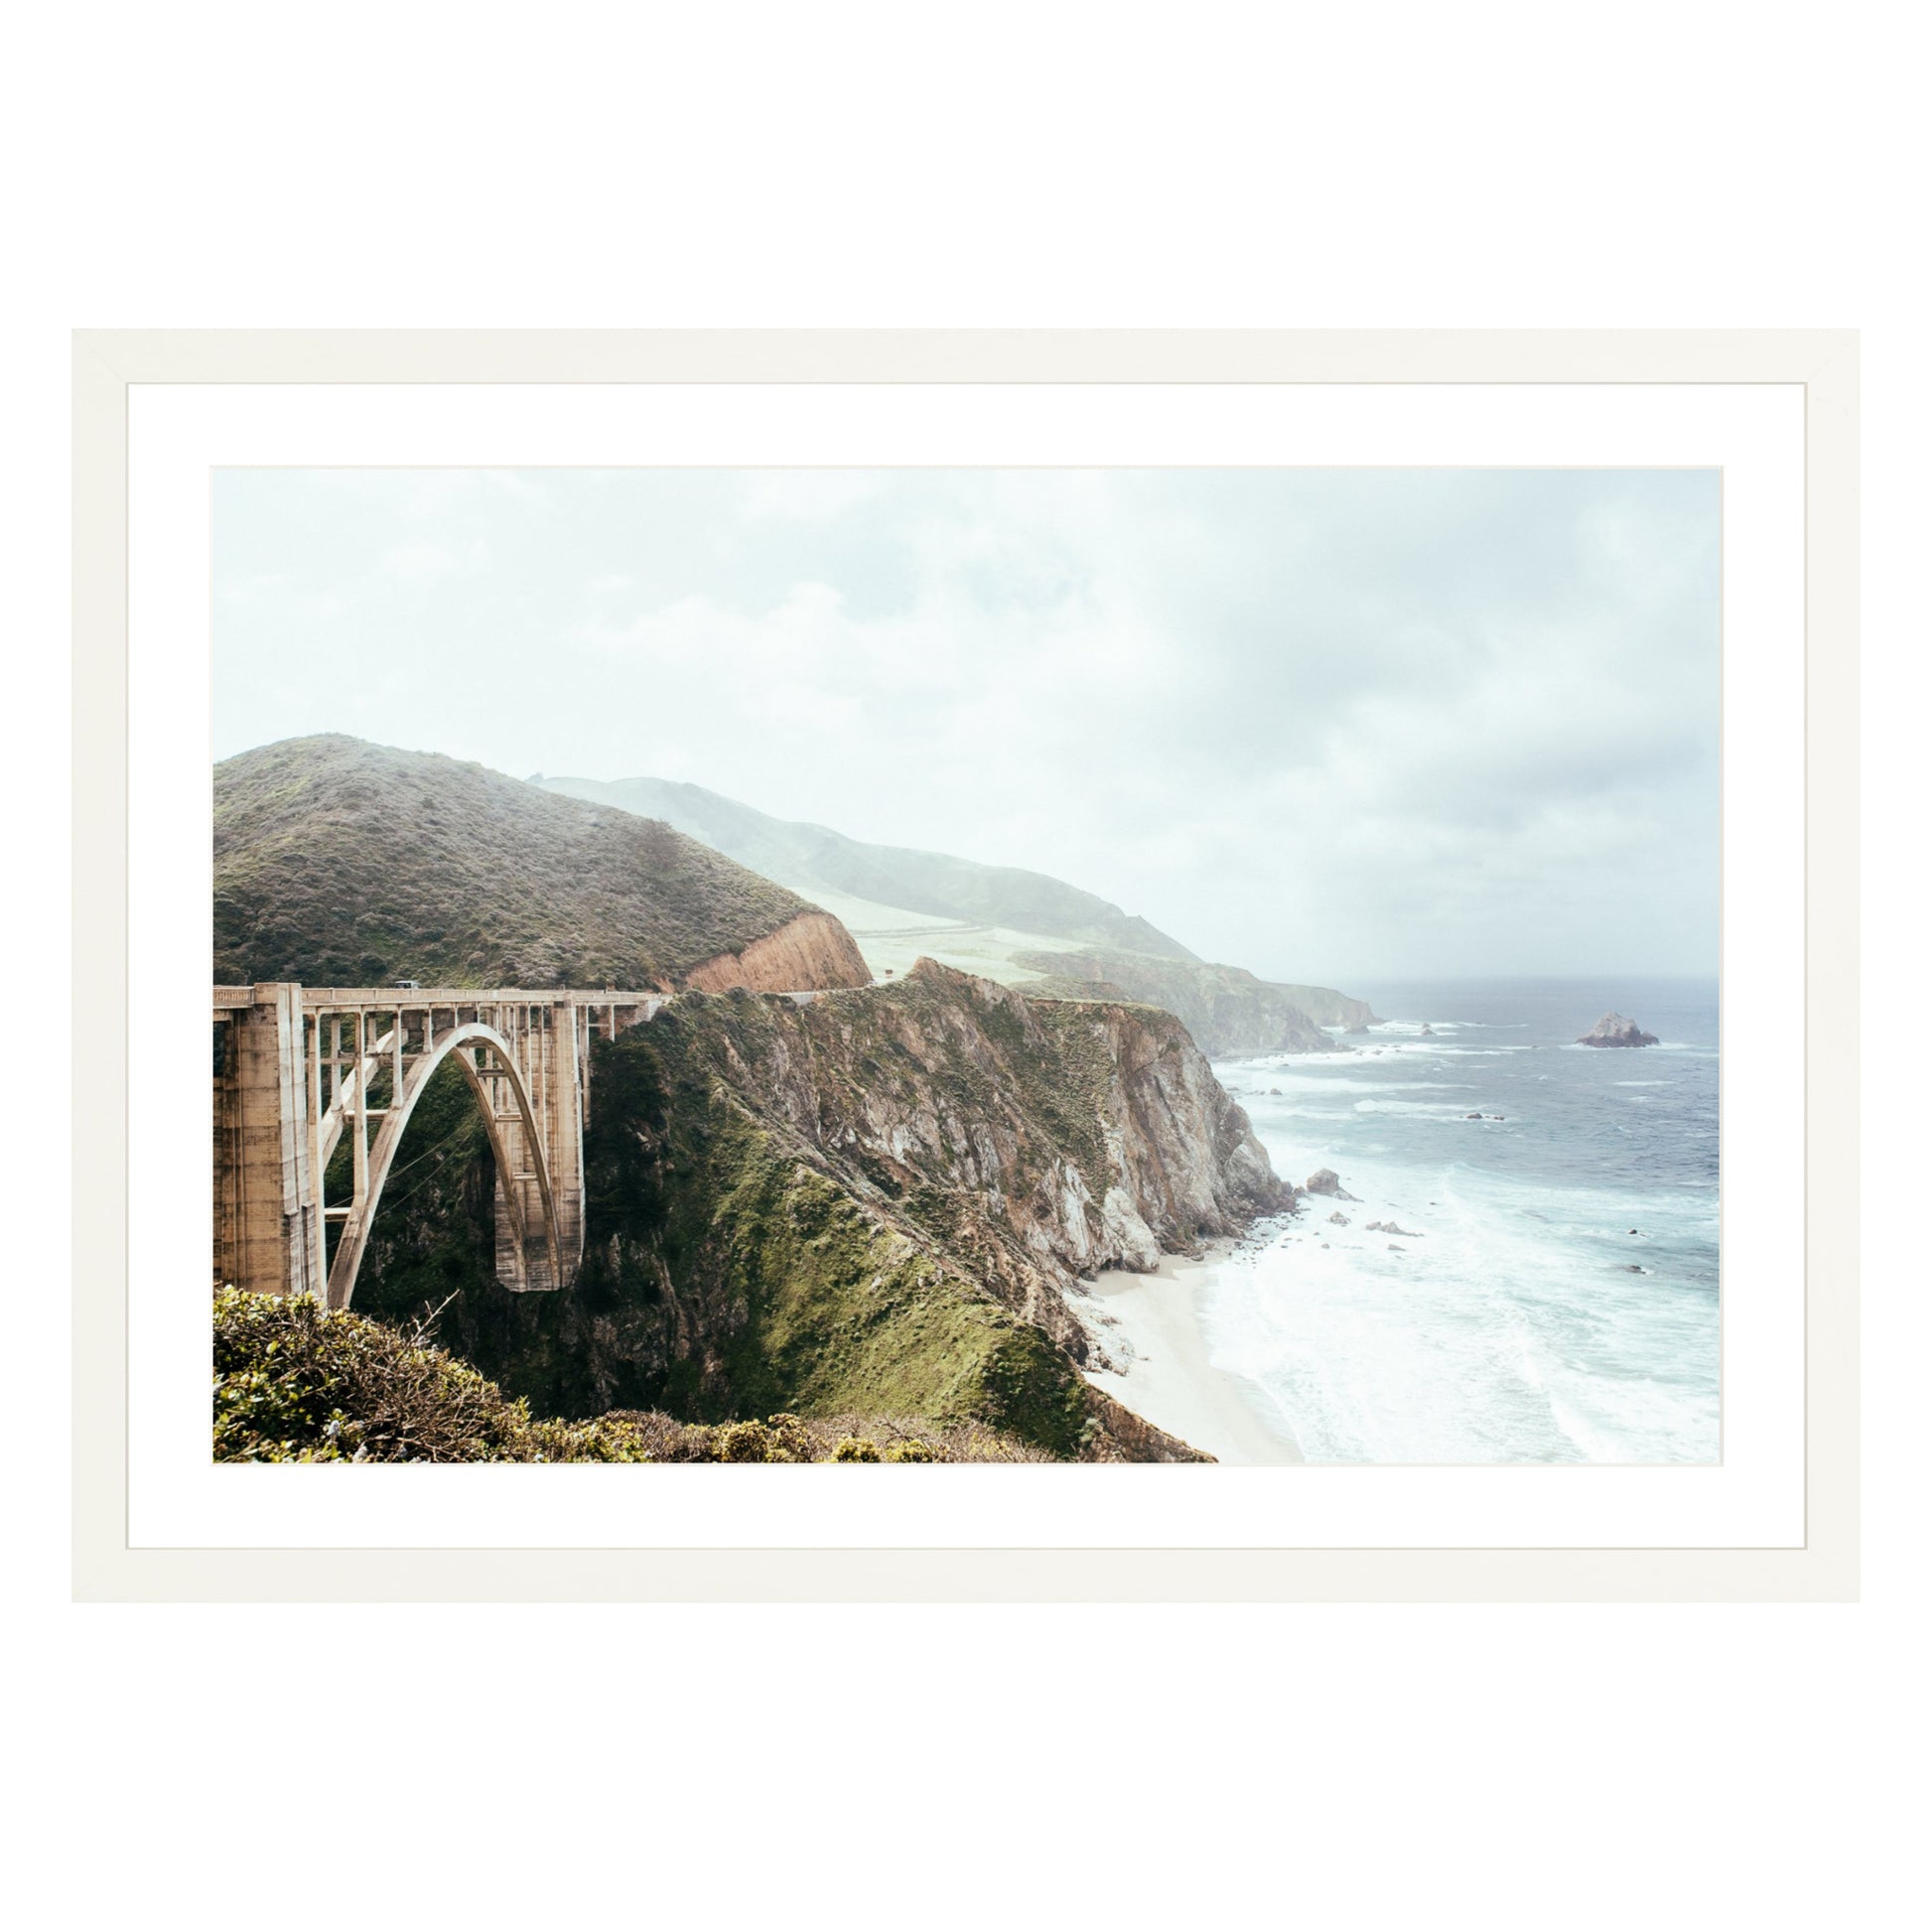 Photograph of Bixby Bridge in Big Sur California framed in white with white mat